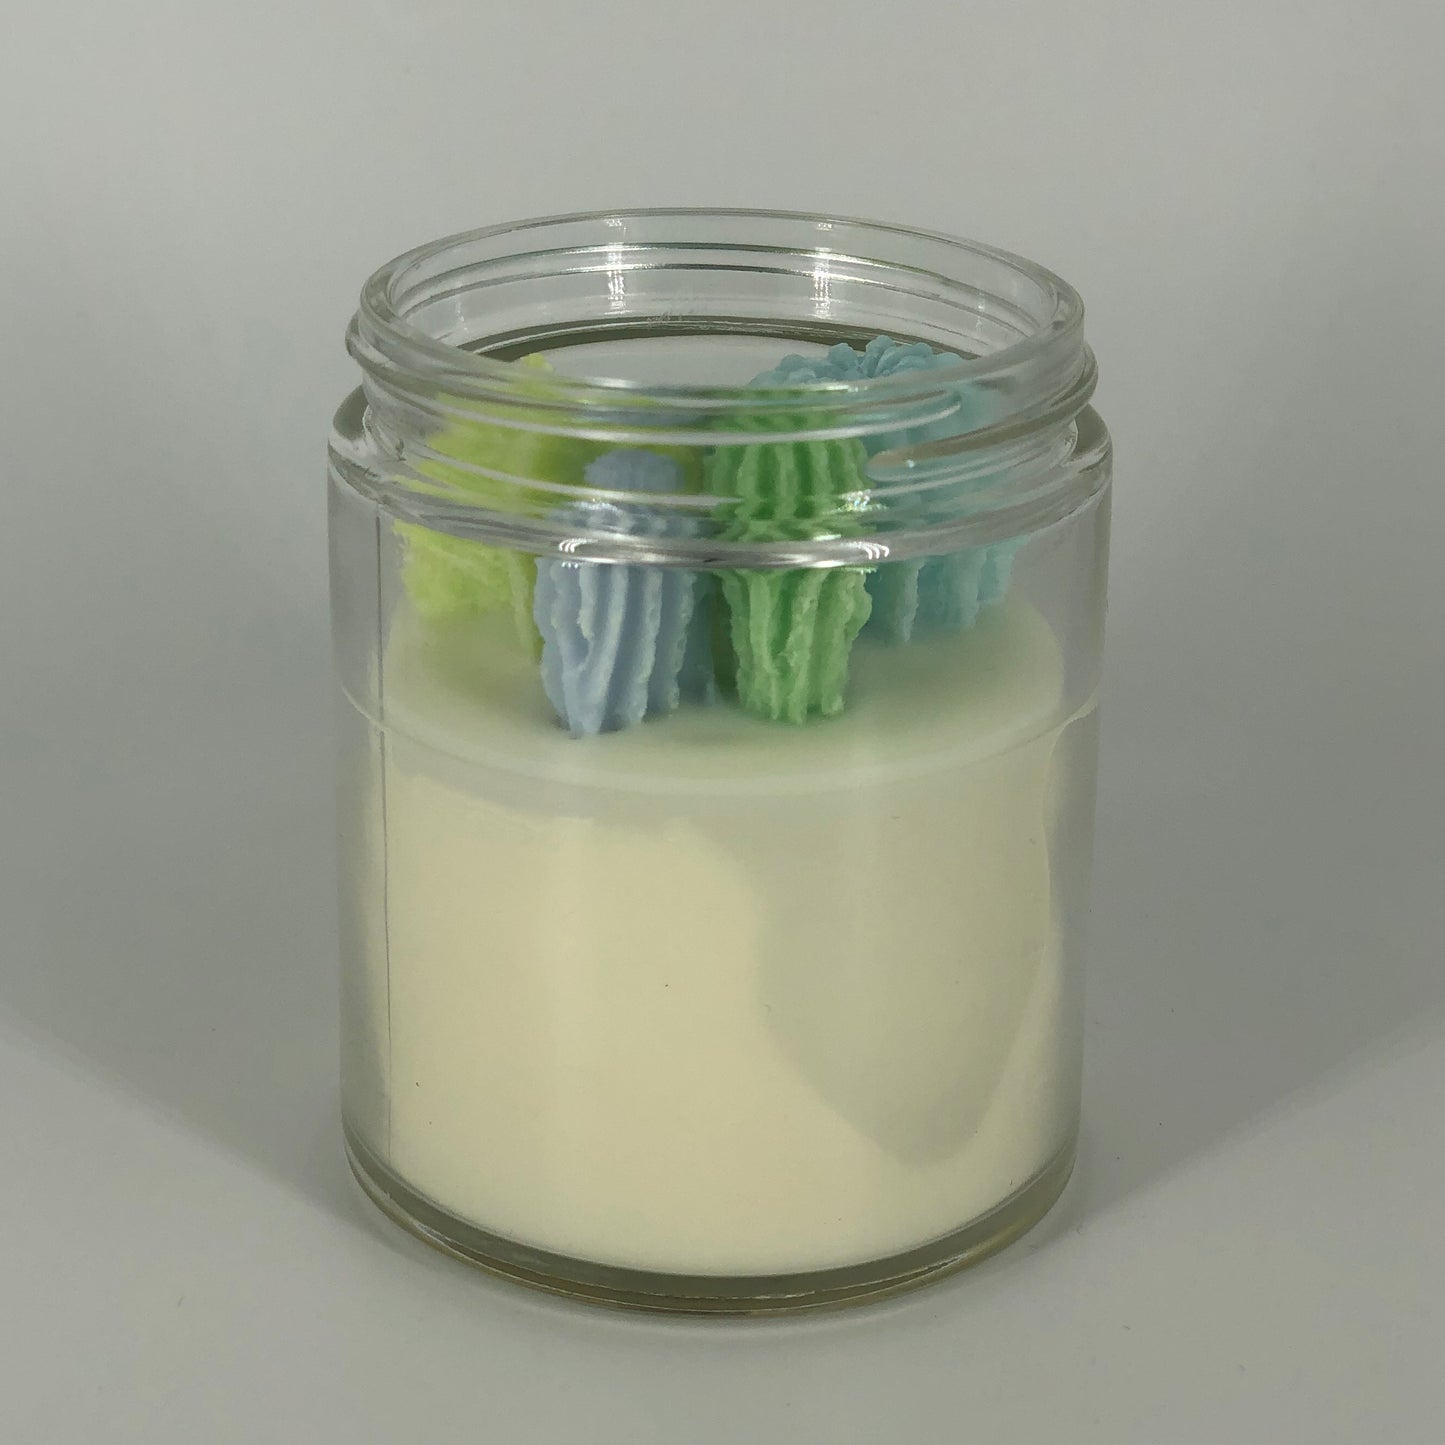 Succulent Soy Candle in Blue and Green